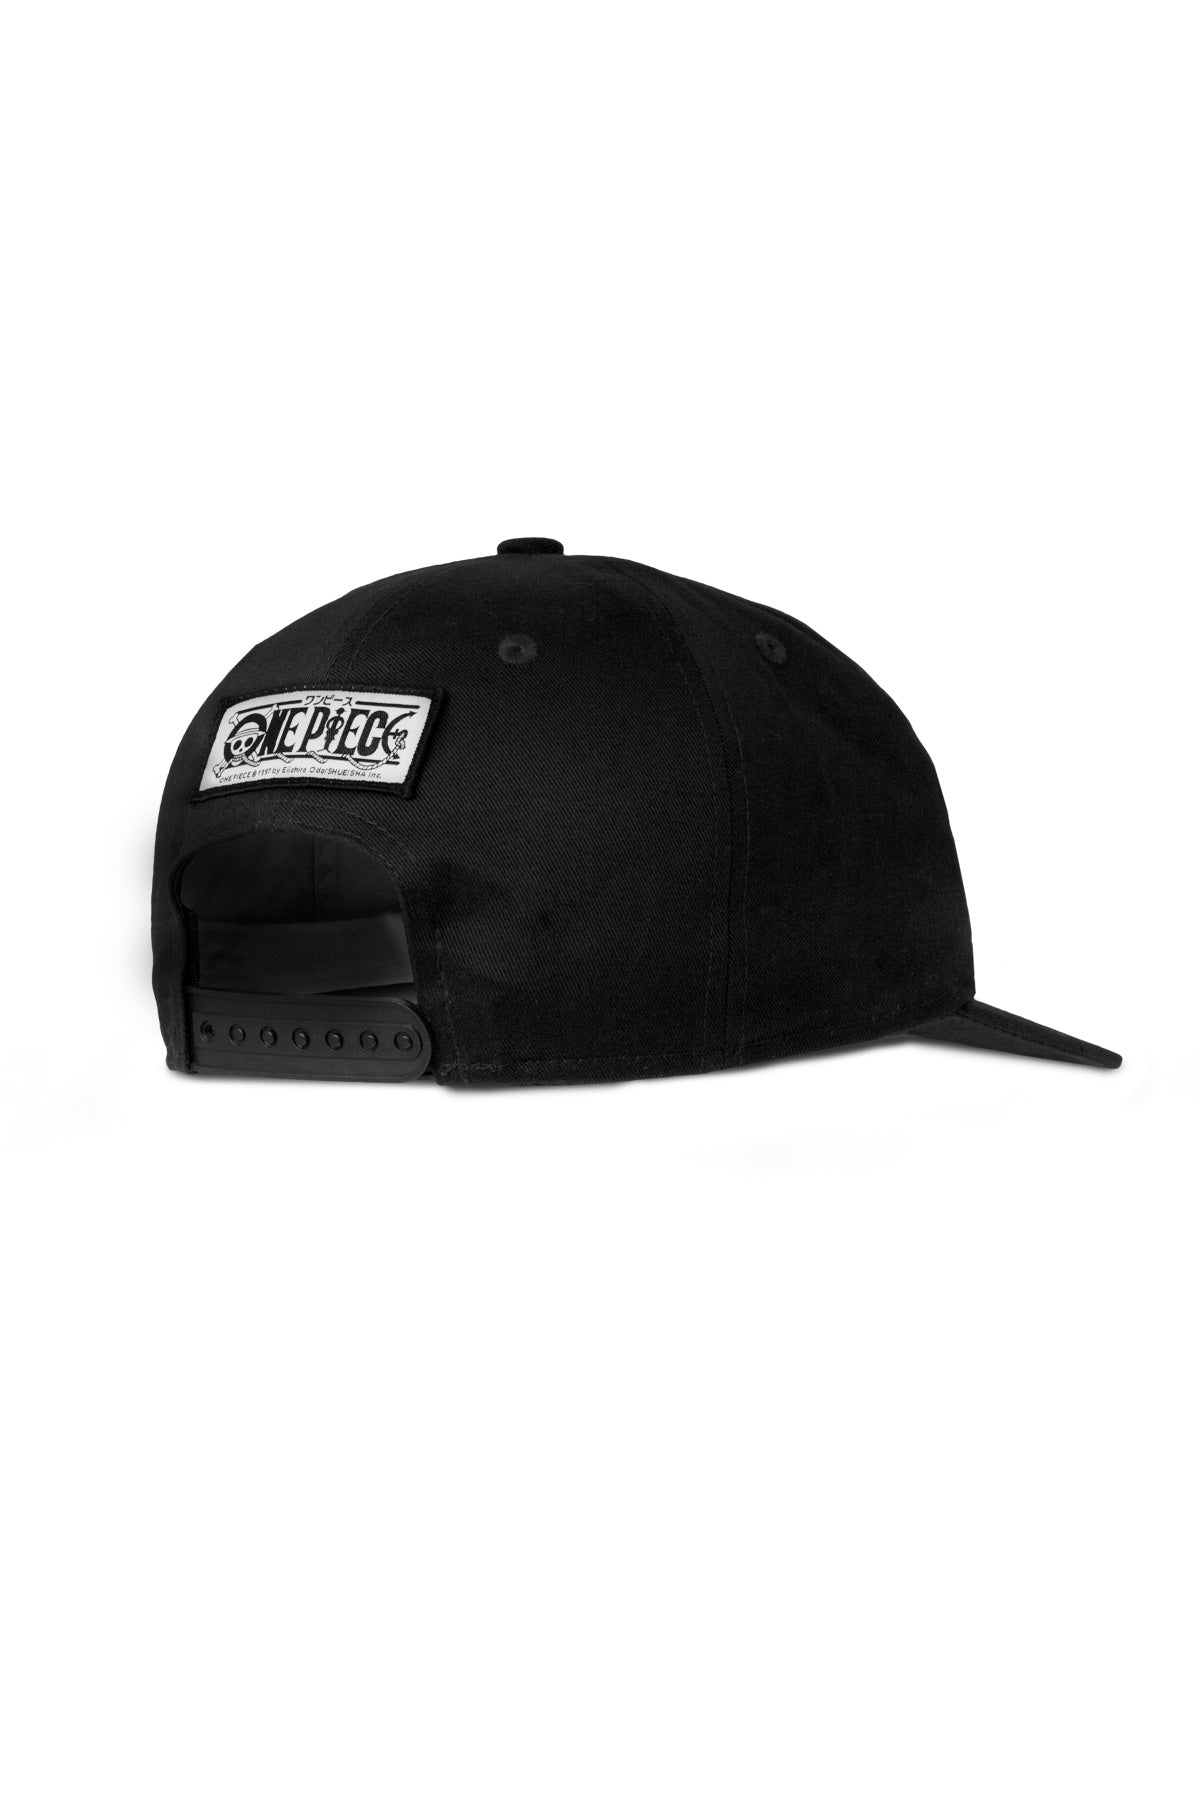 One Piece Jinbei Snackpack Hat - Back